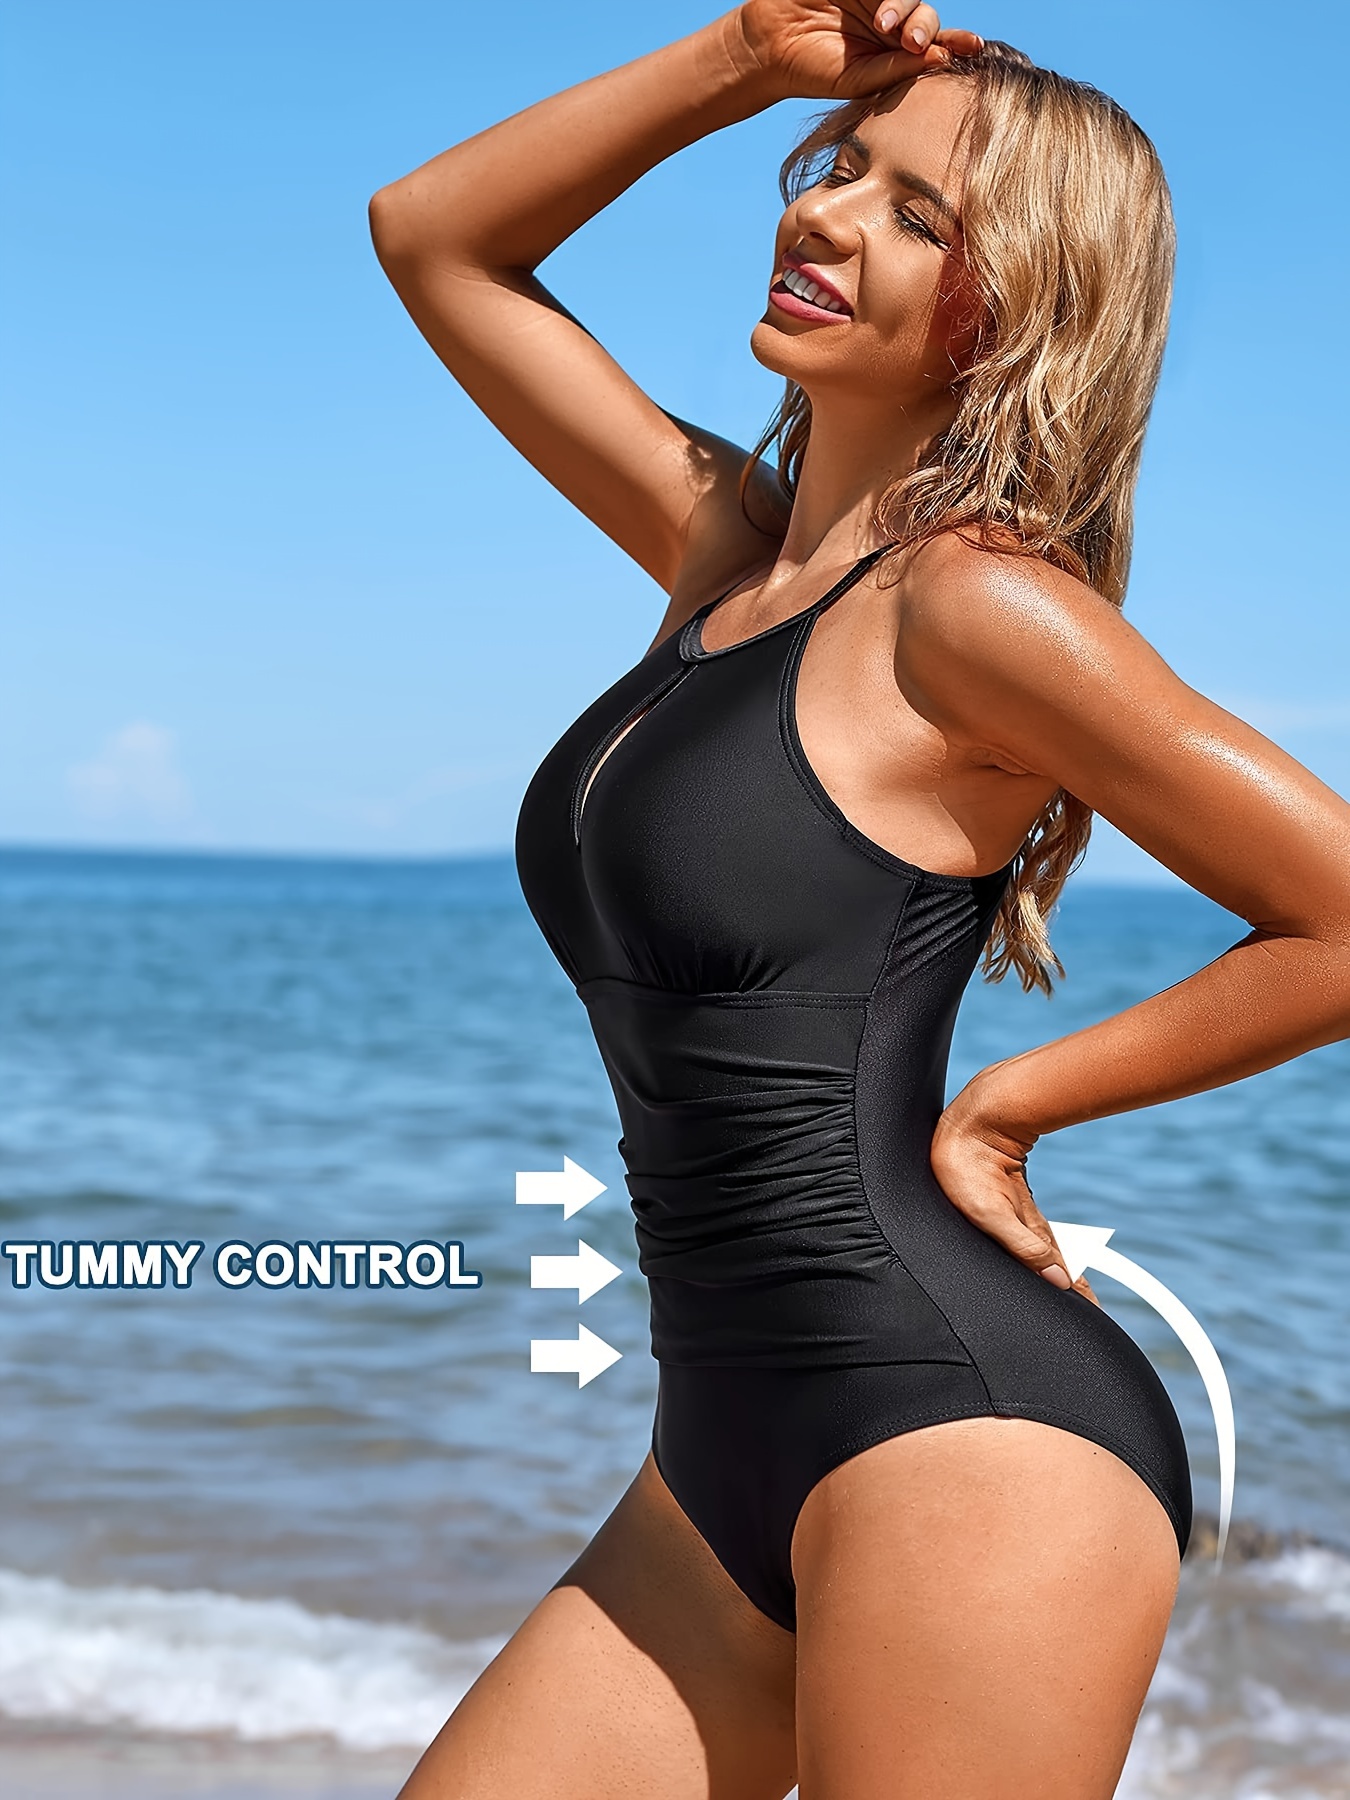 This slimming tummy control one-piece swimsuit comes in over 10